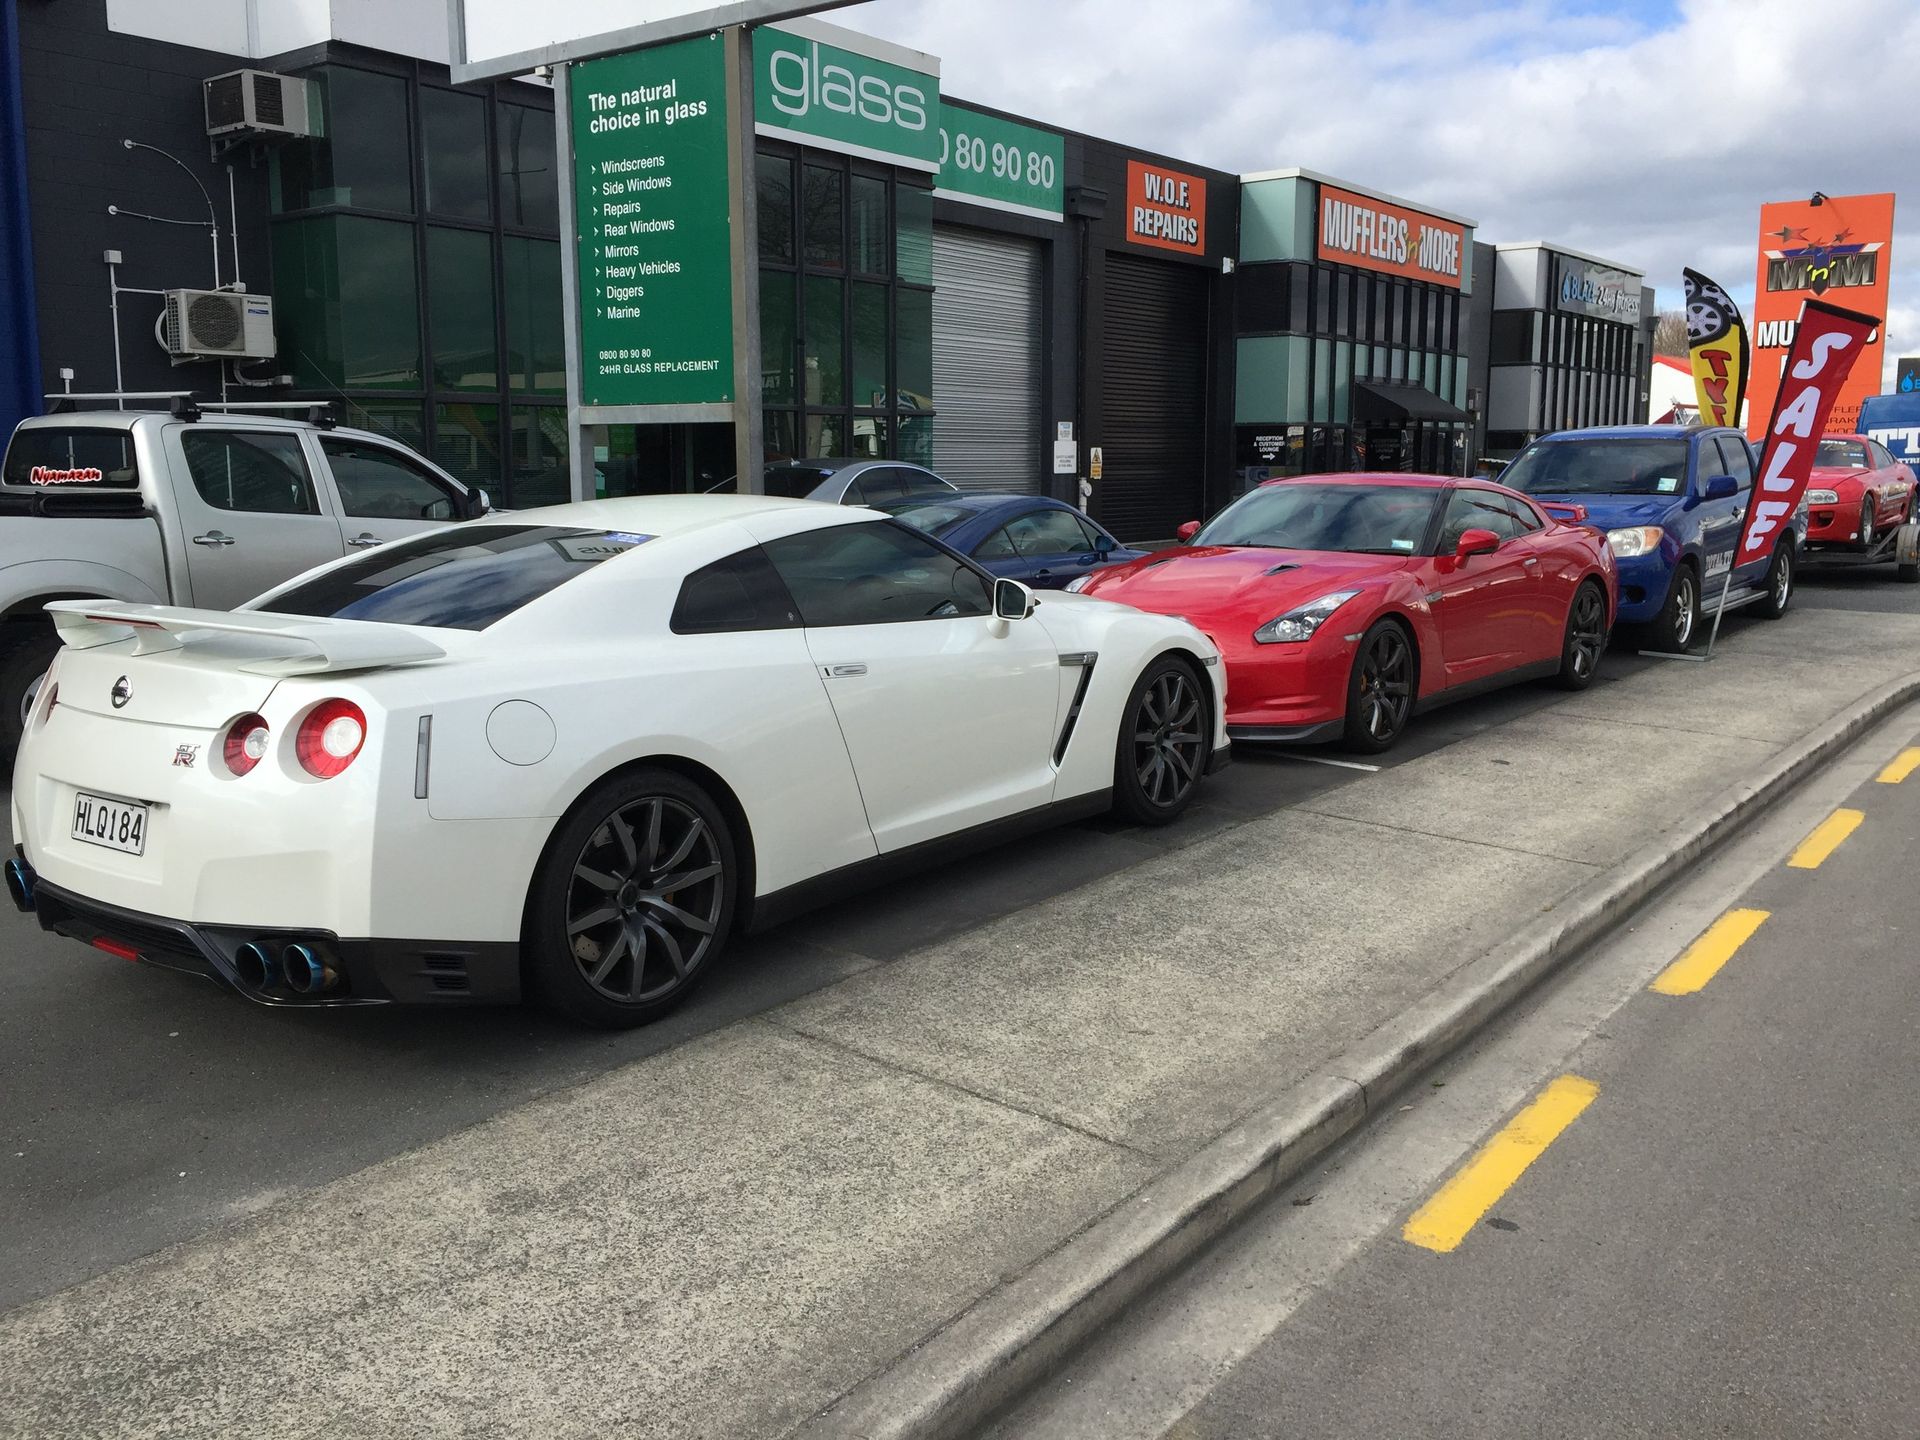 Tyres and wheels for cars in Rotorua